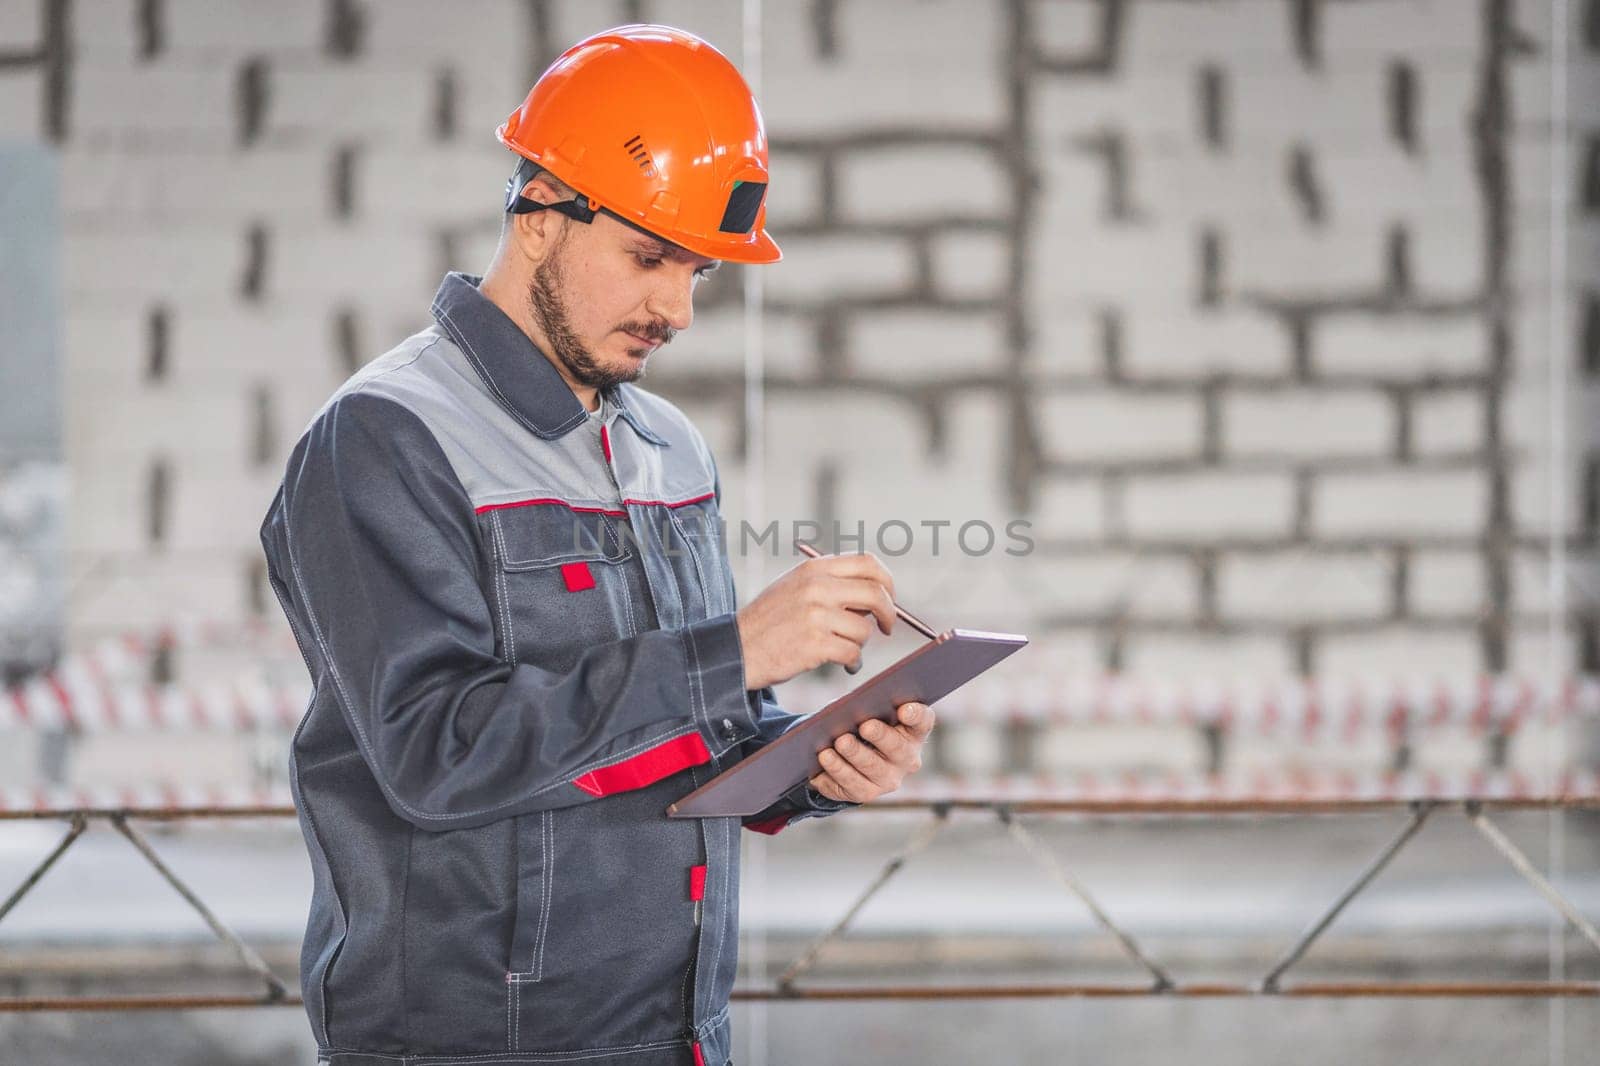 Caucasian worker at a construction site uses a digital tablet in his professional activities, copy space.